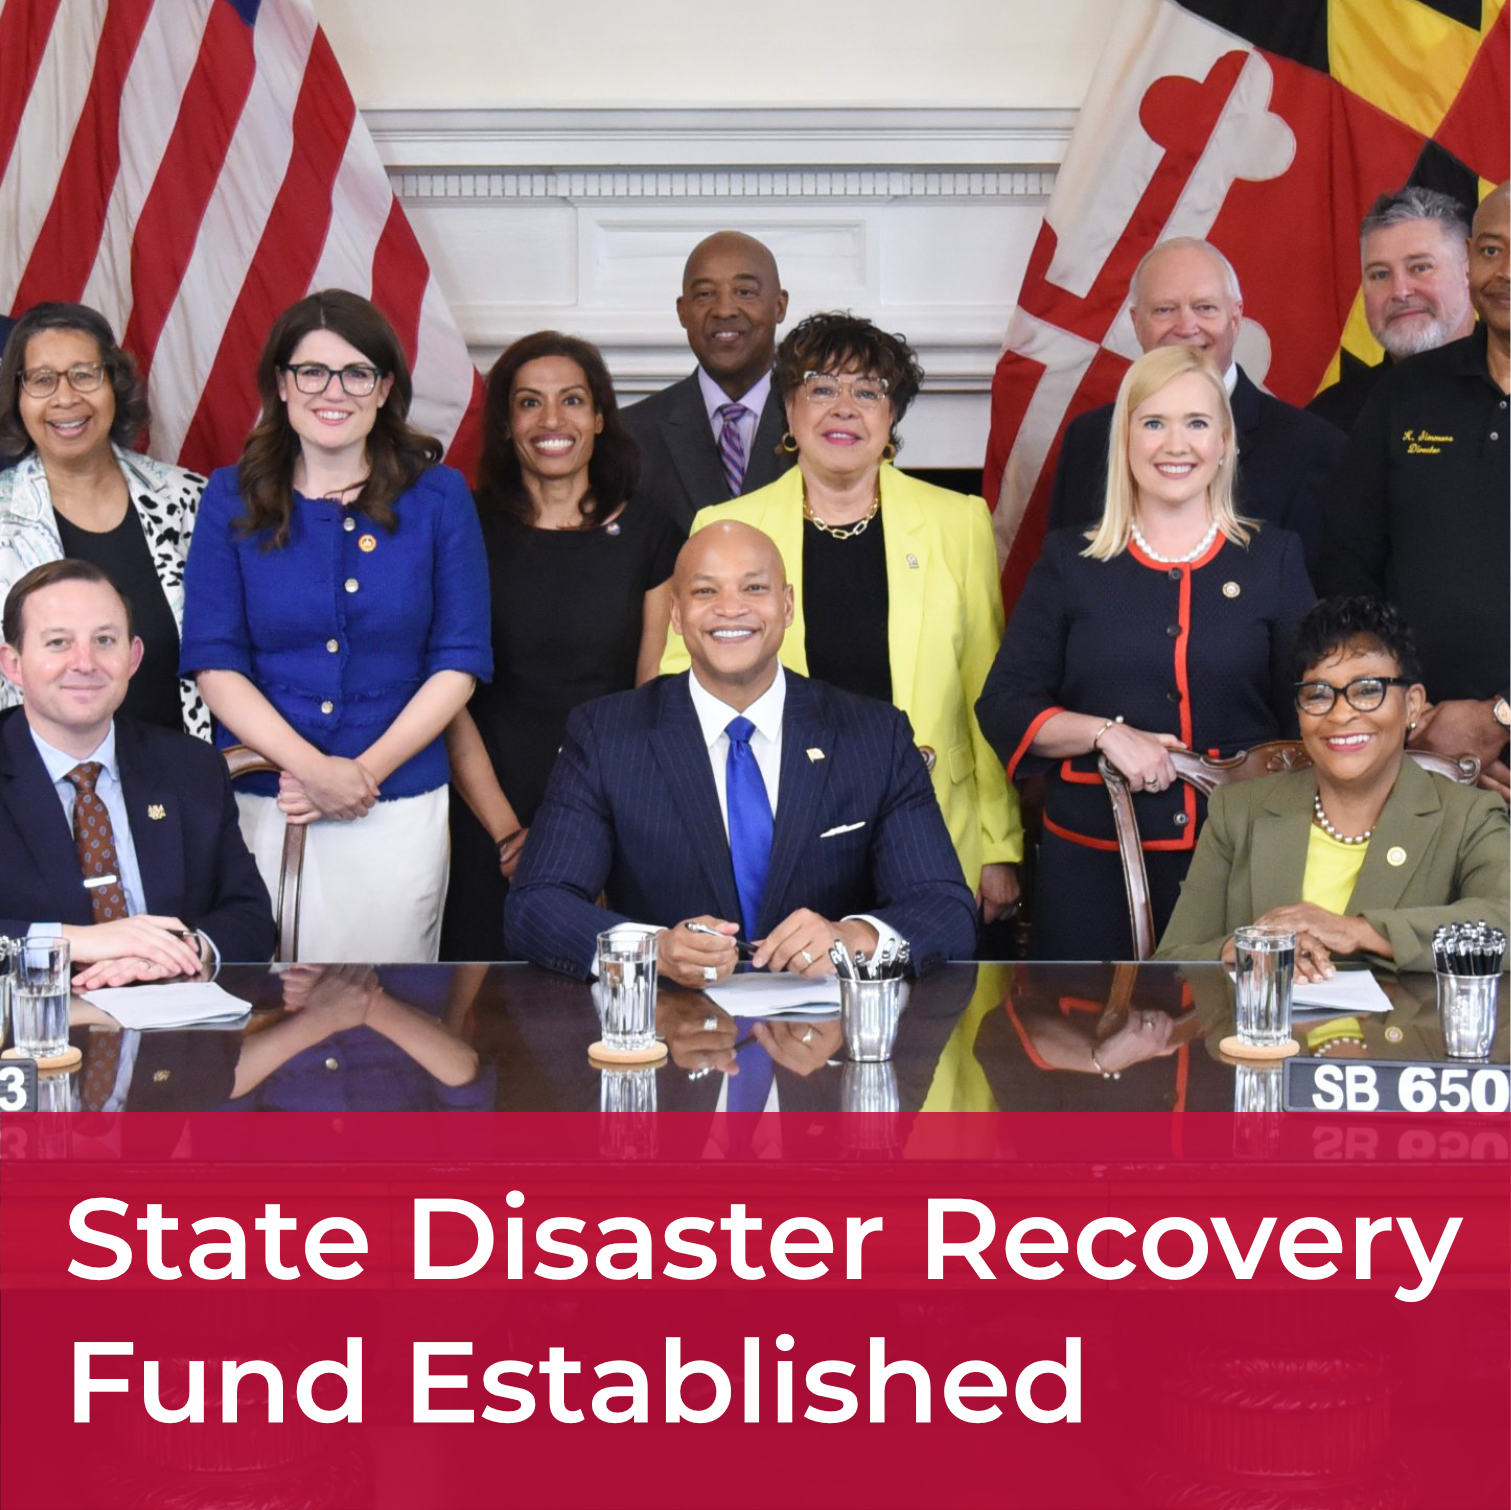 A clickable tile with the words "State Disaster Recovery Fund Established" overlaid on a photo of the bill signing ceremony